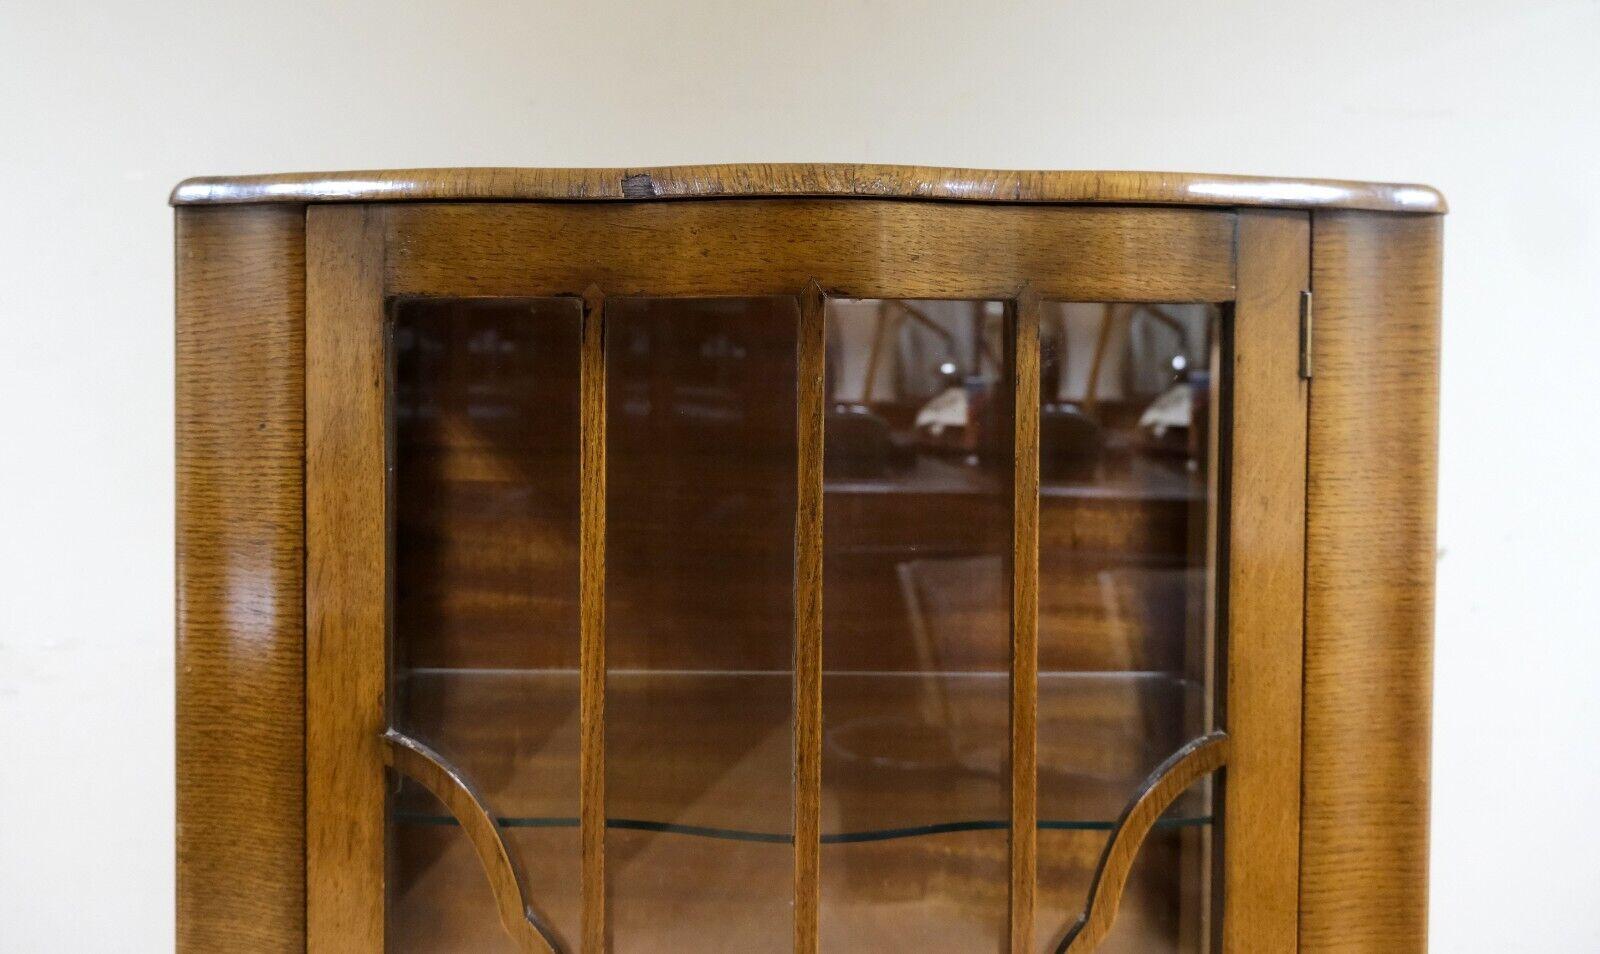 SMALL GORGEOUS WALNUT GLAZED BOOKCASE WiTH GLASS SHELVES ON QUEEN ANN Style LEGS (Englisch) im Angebot